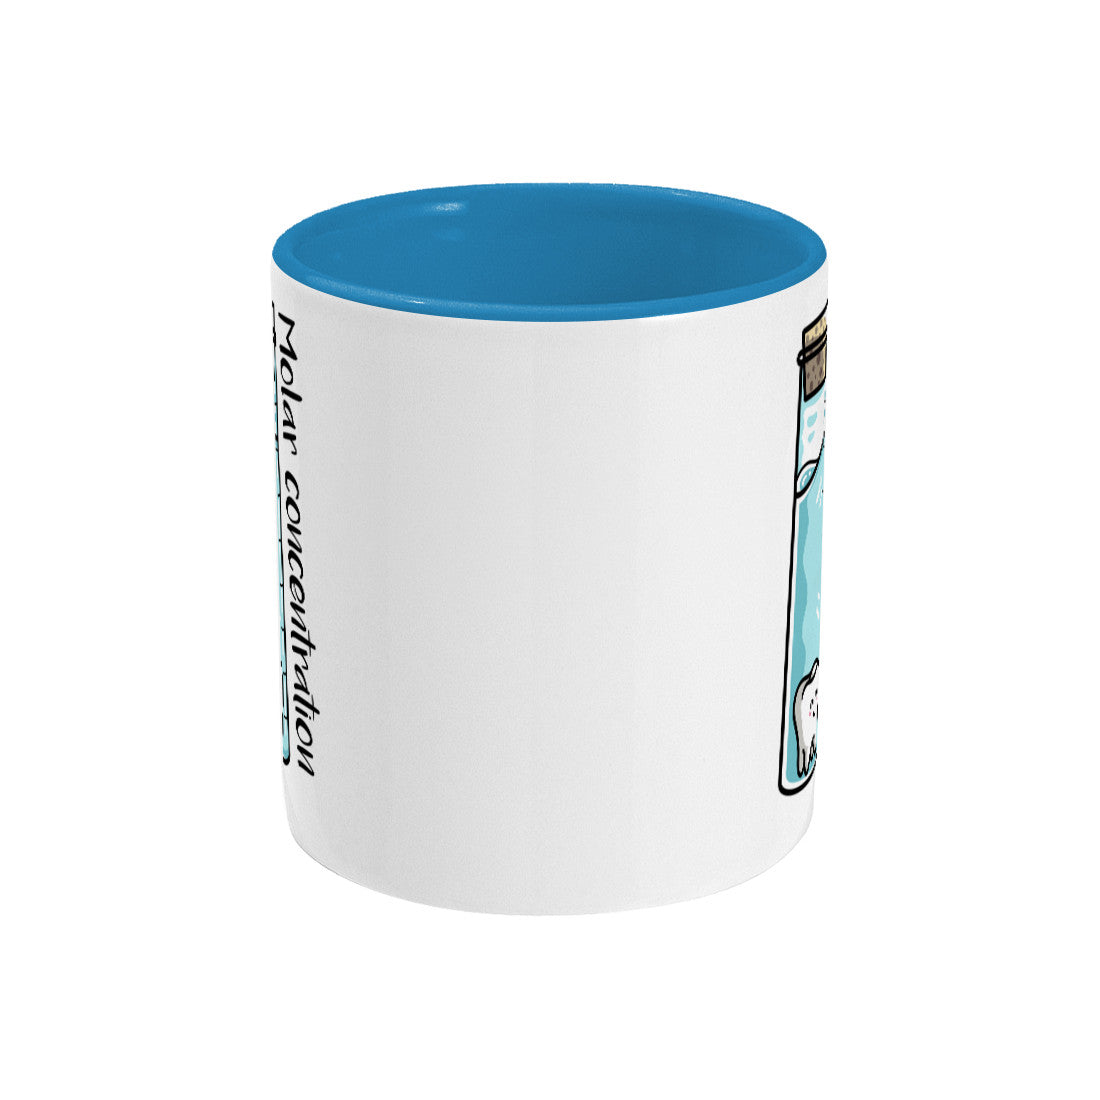 A corked chemistry vessel of liquid containing a molar tooth design on a two toned blue and white ceramic mug, side view